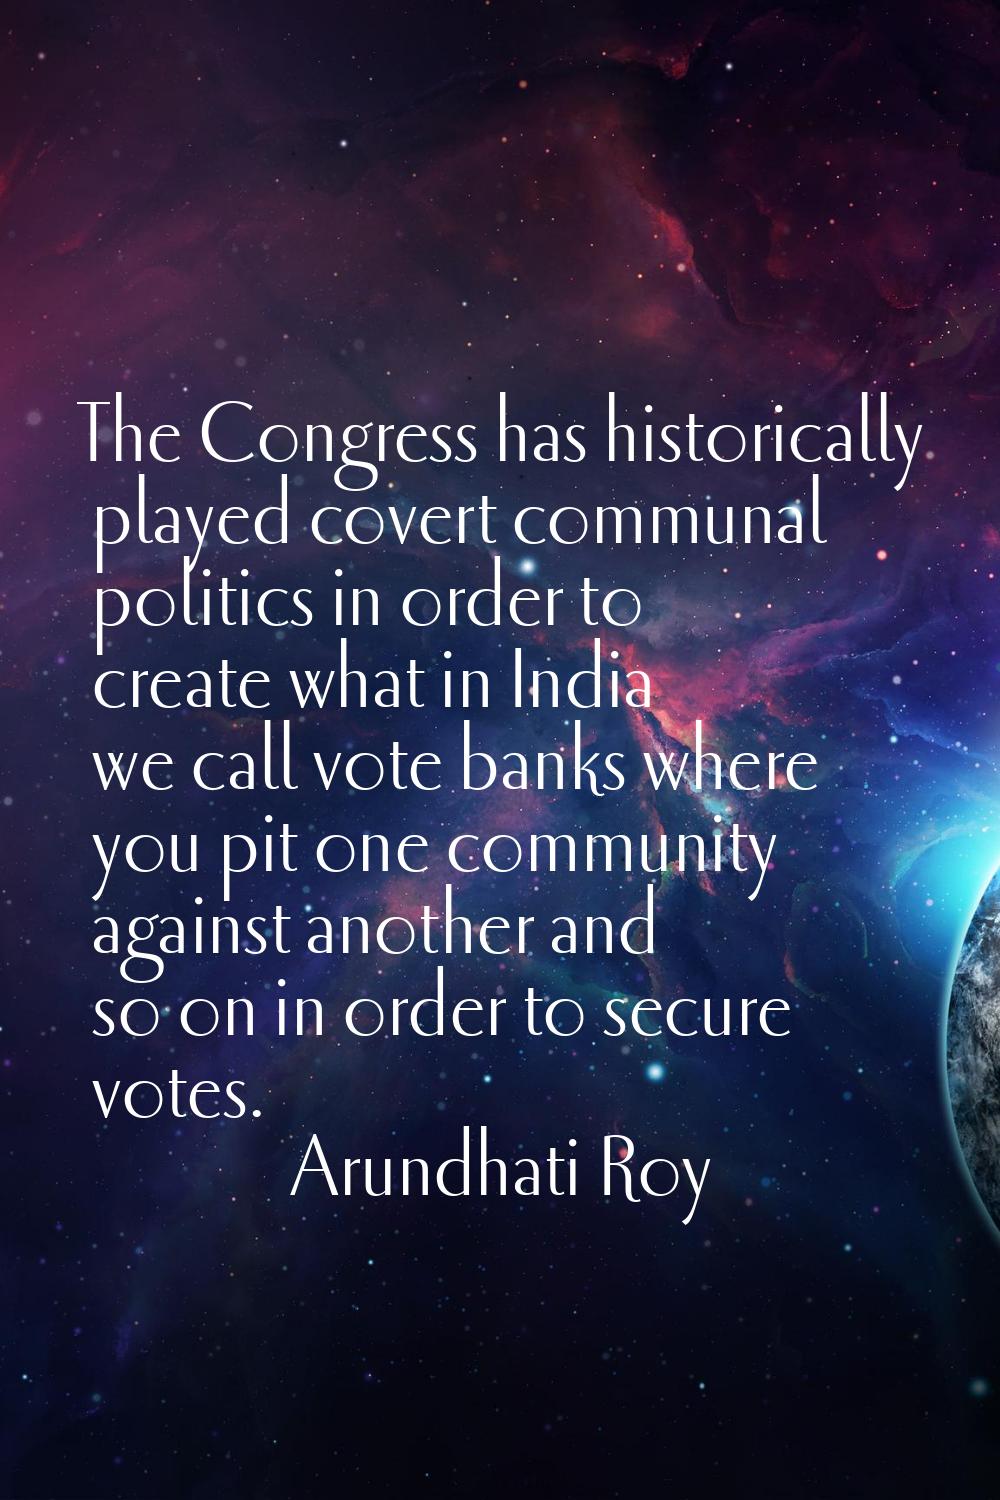 The Congress has historically played covert communal politics in order to create what in India we c